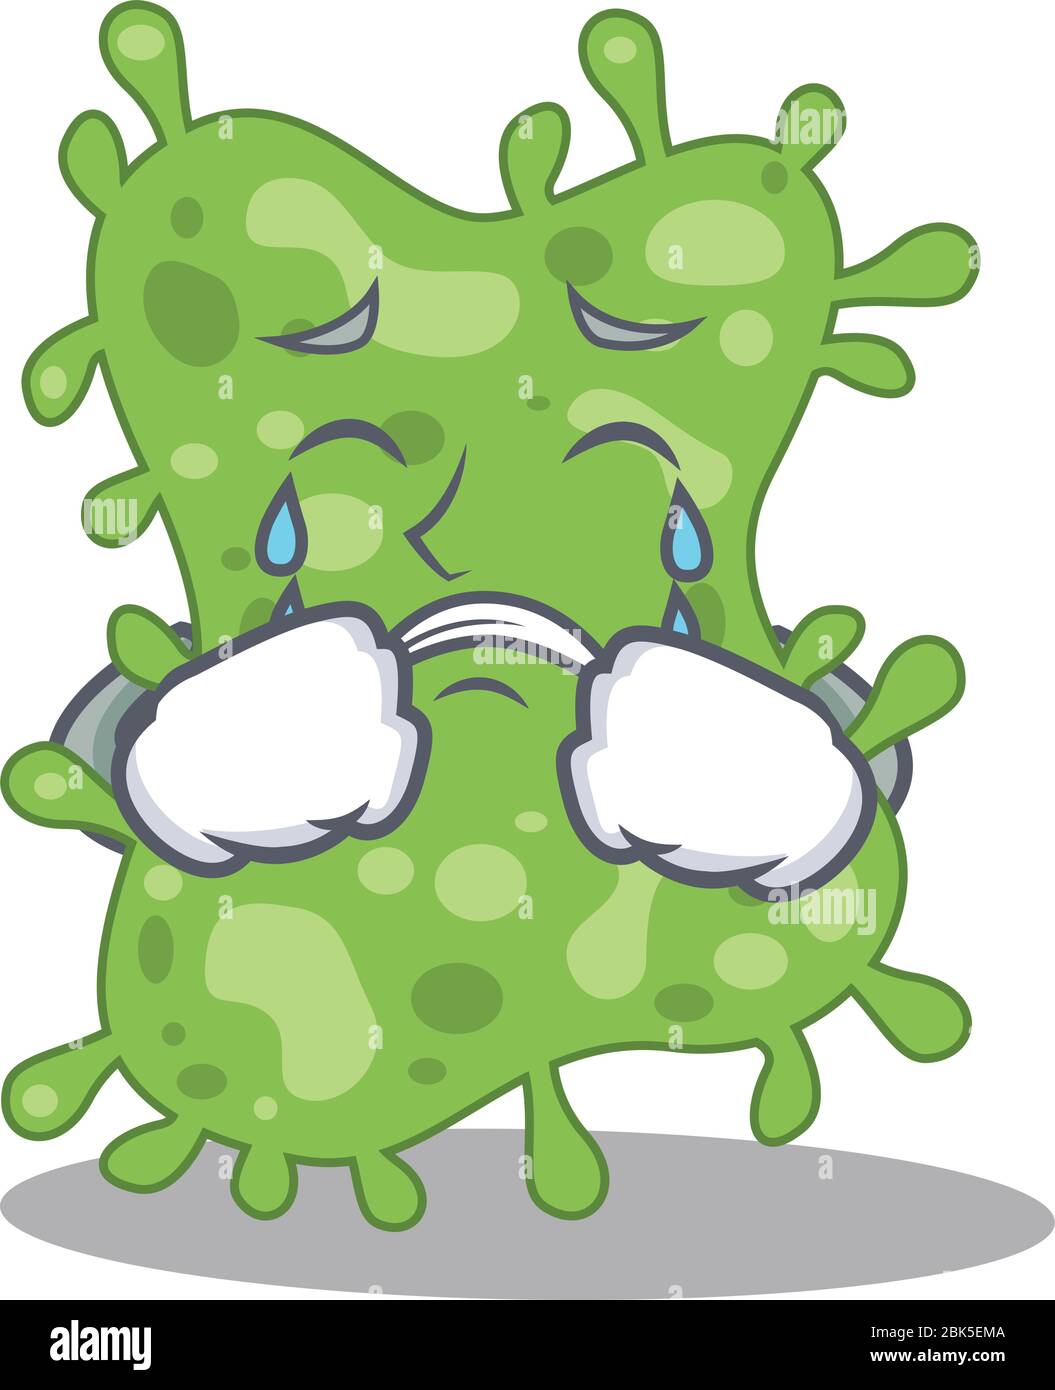 Cartoon character design of salmonella enterica with a crying face Stock Vector